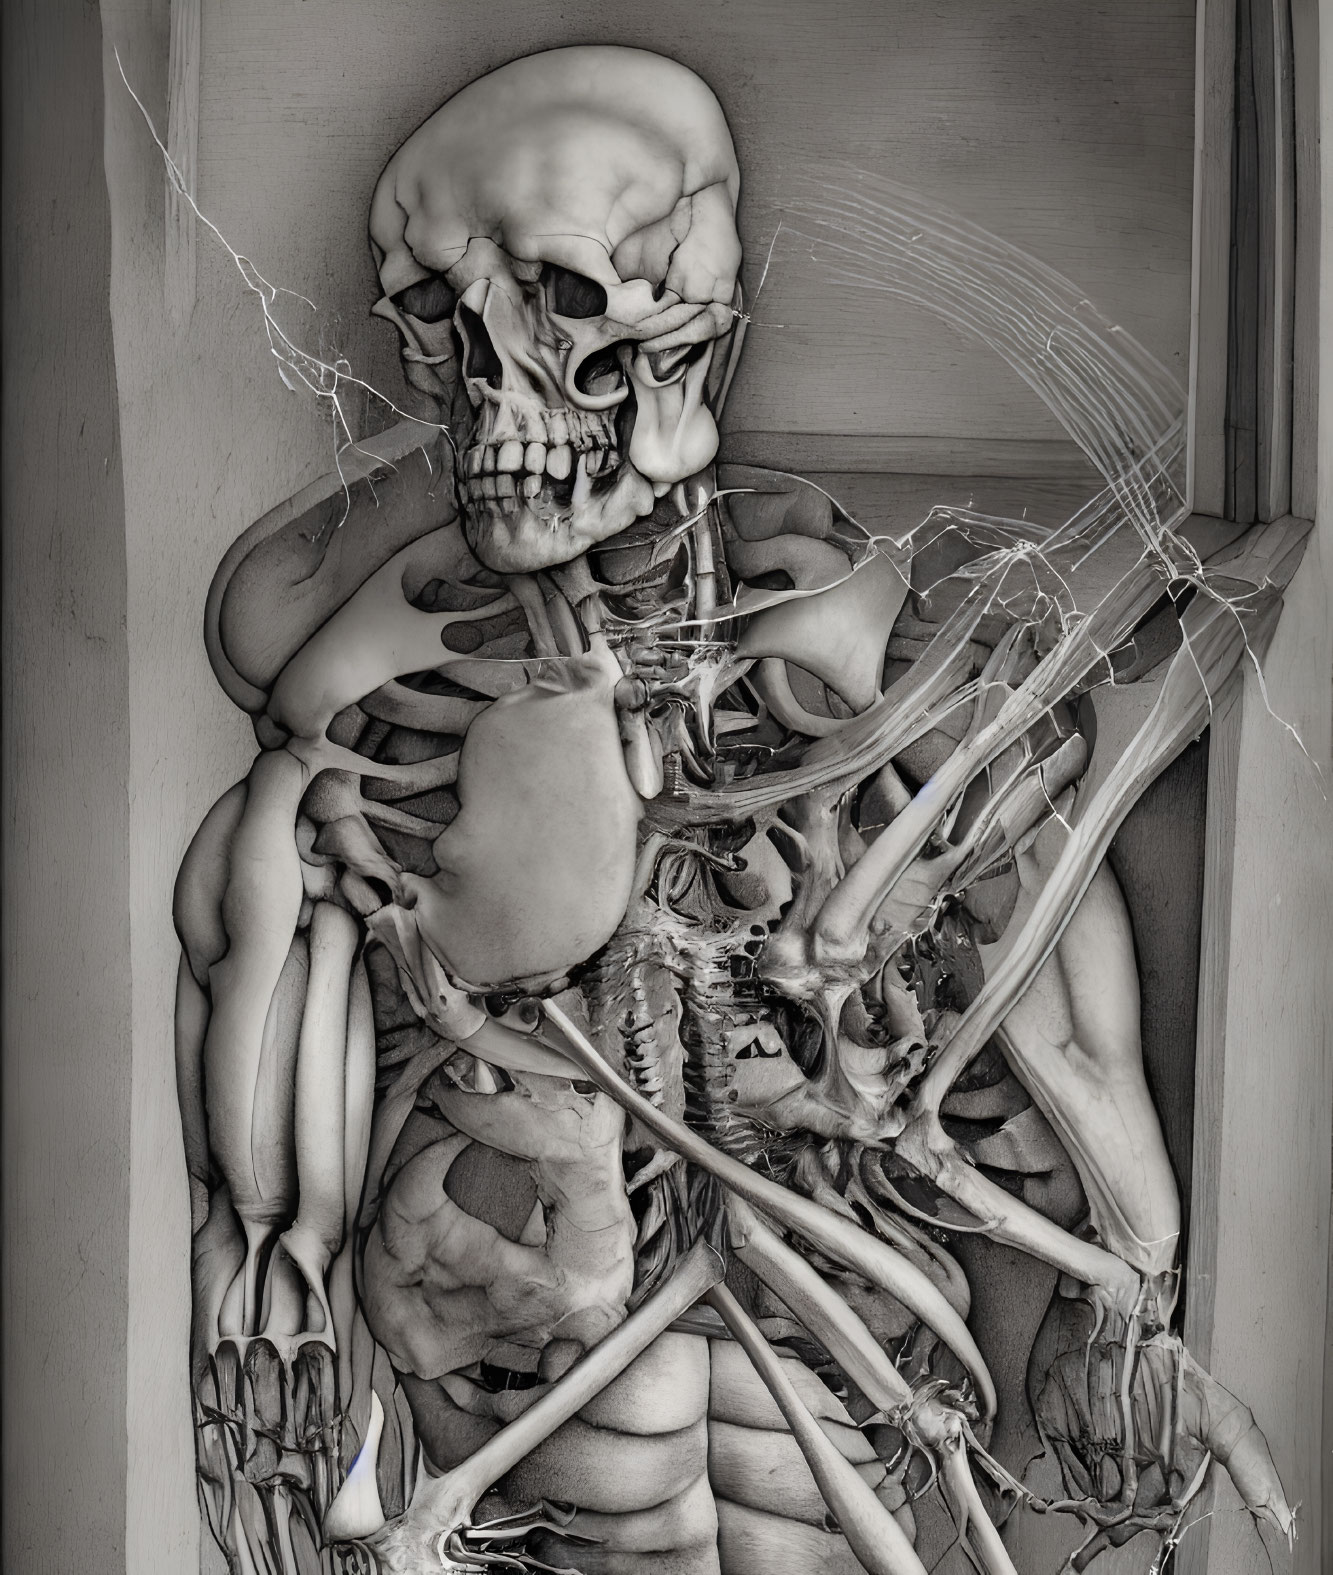 Detailed Human Body Anatomy Sculpture with Exposed Muscles, Skeleton, and Skull in Niche